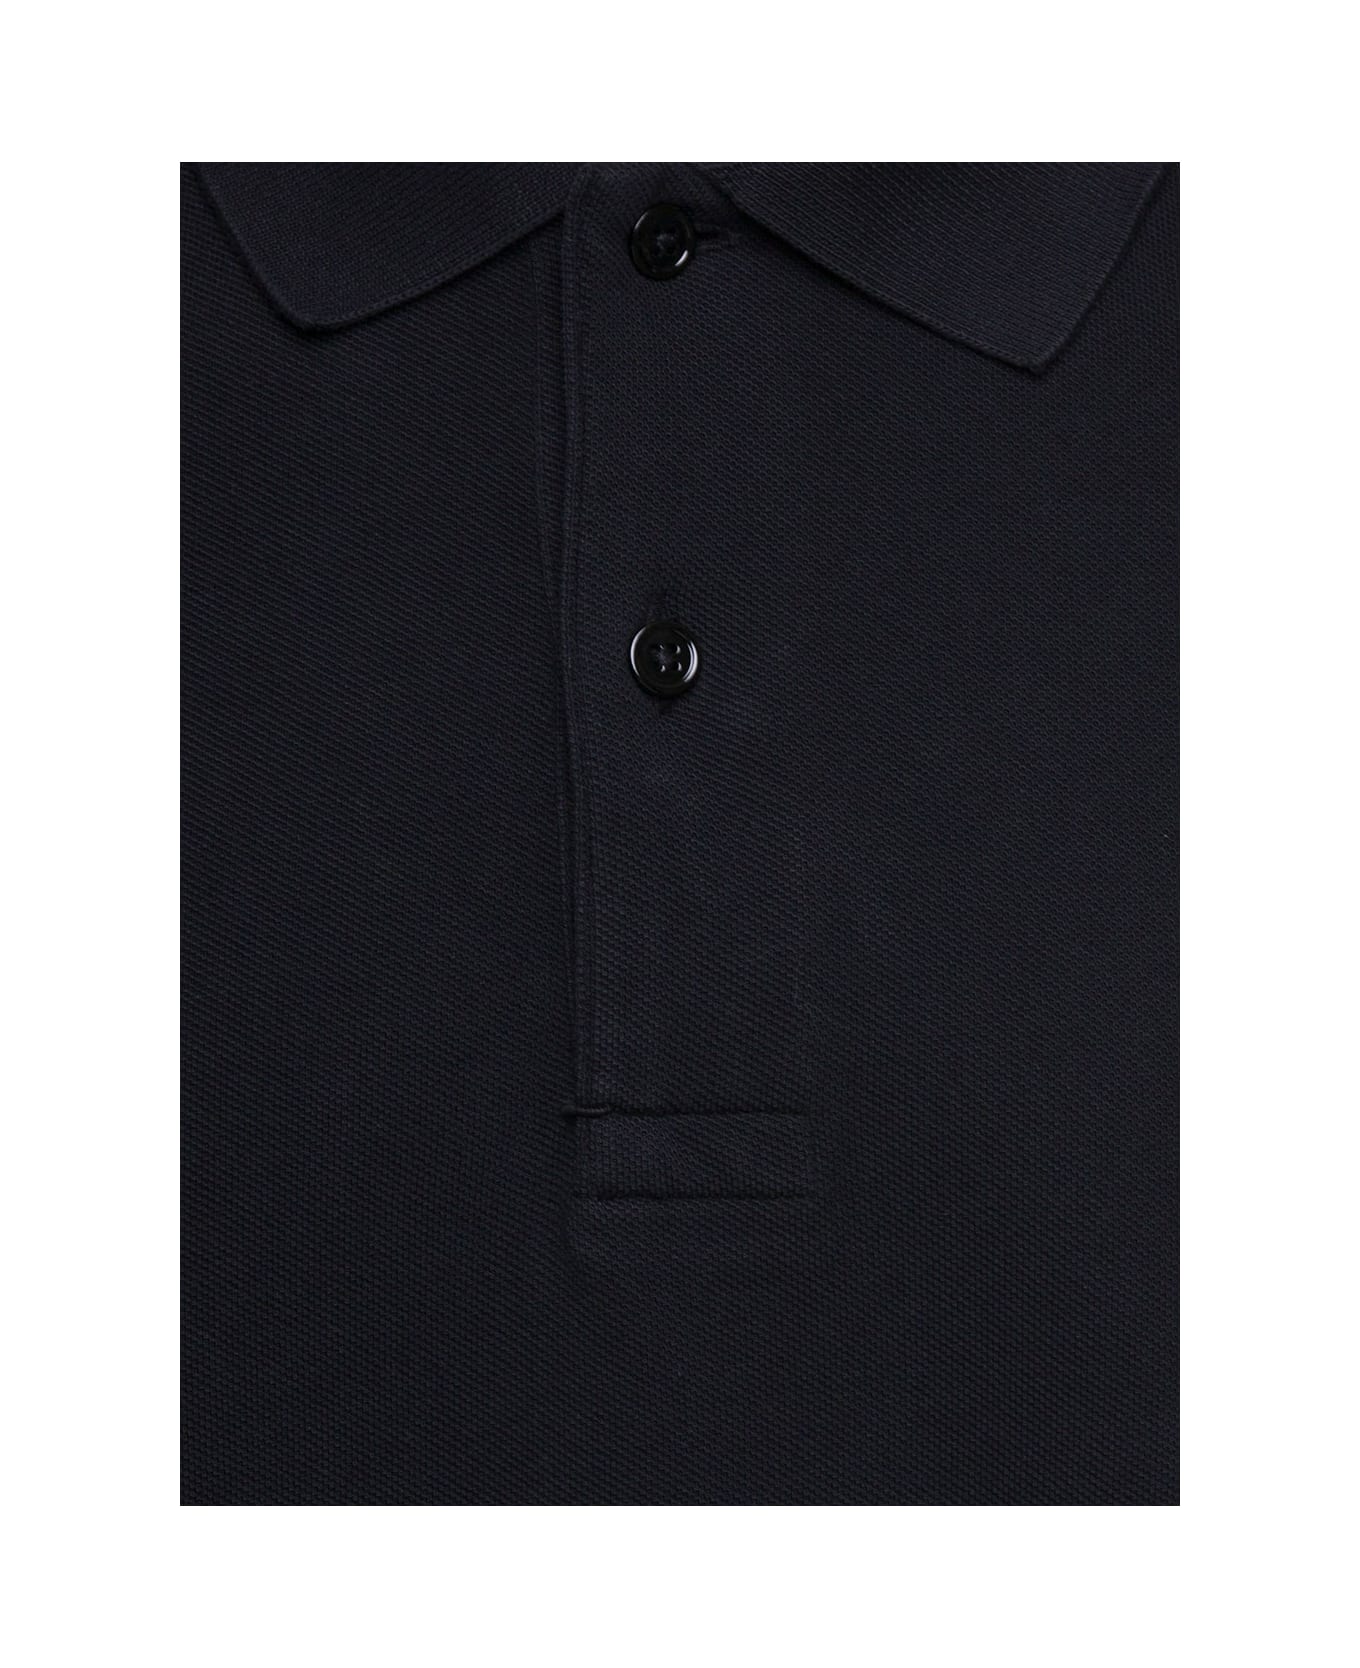 Tom Ford Black Short-sleeves Polo In Cotton Piquet Jersey Man - Nero